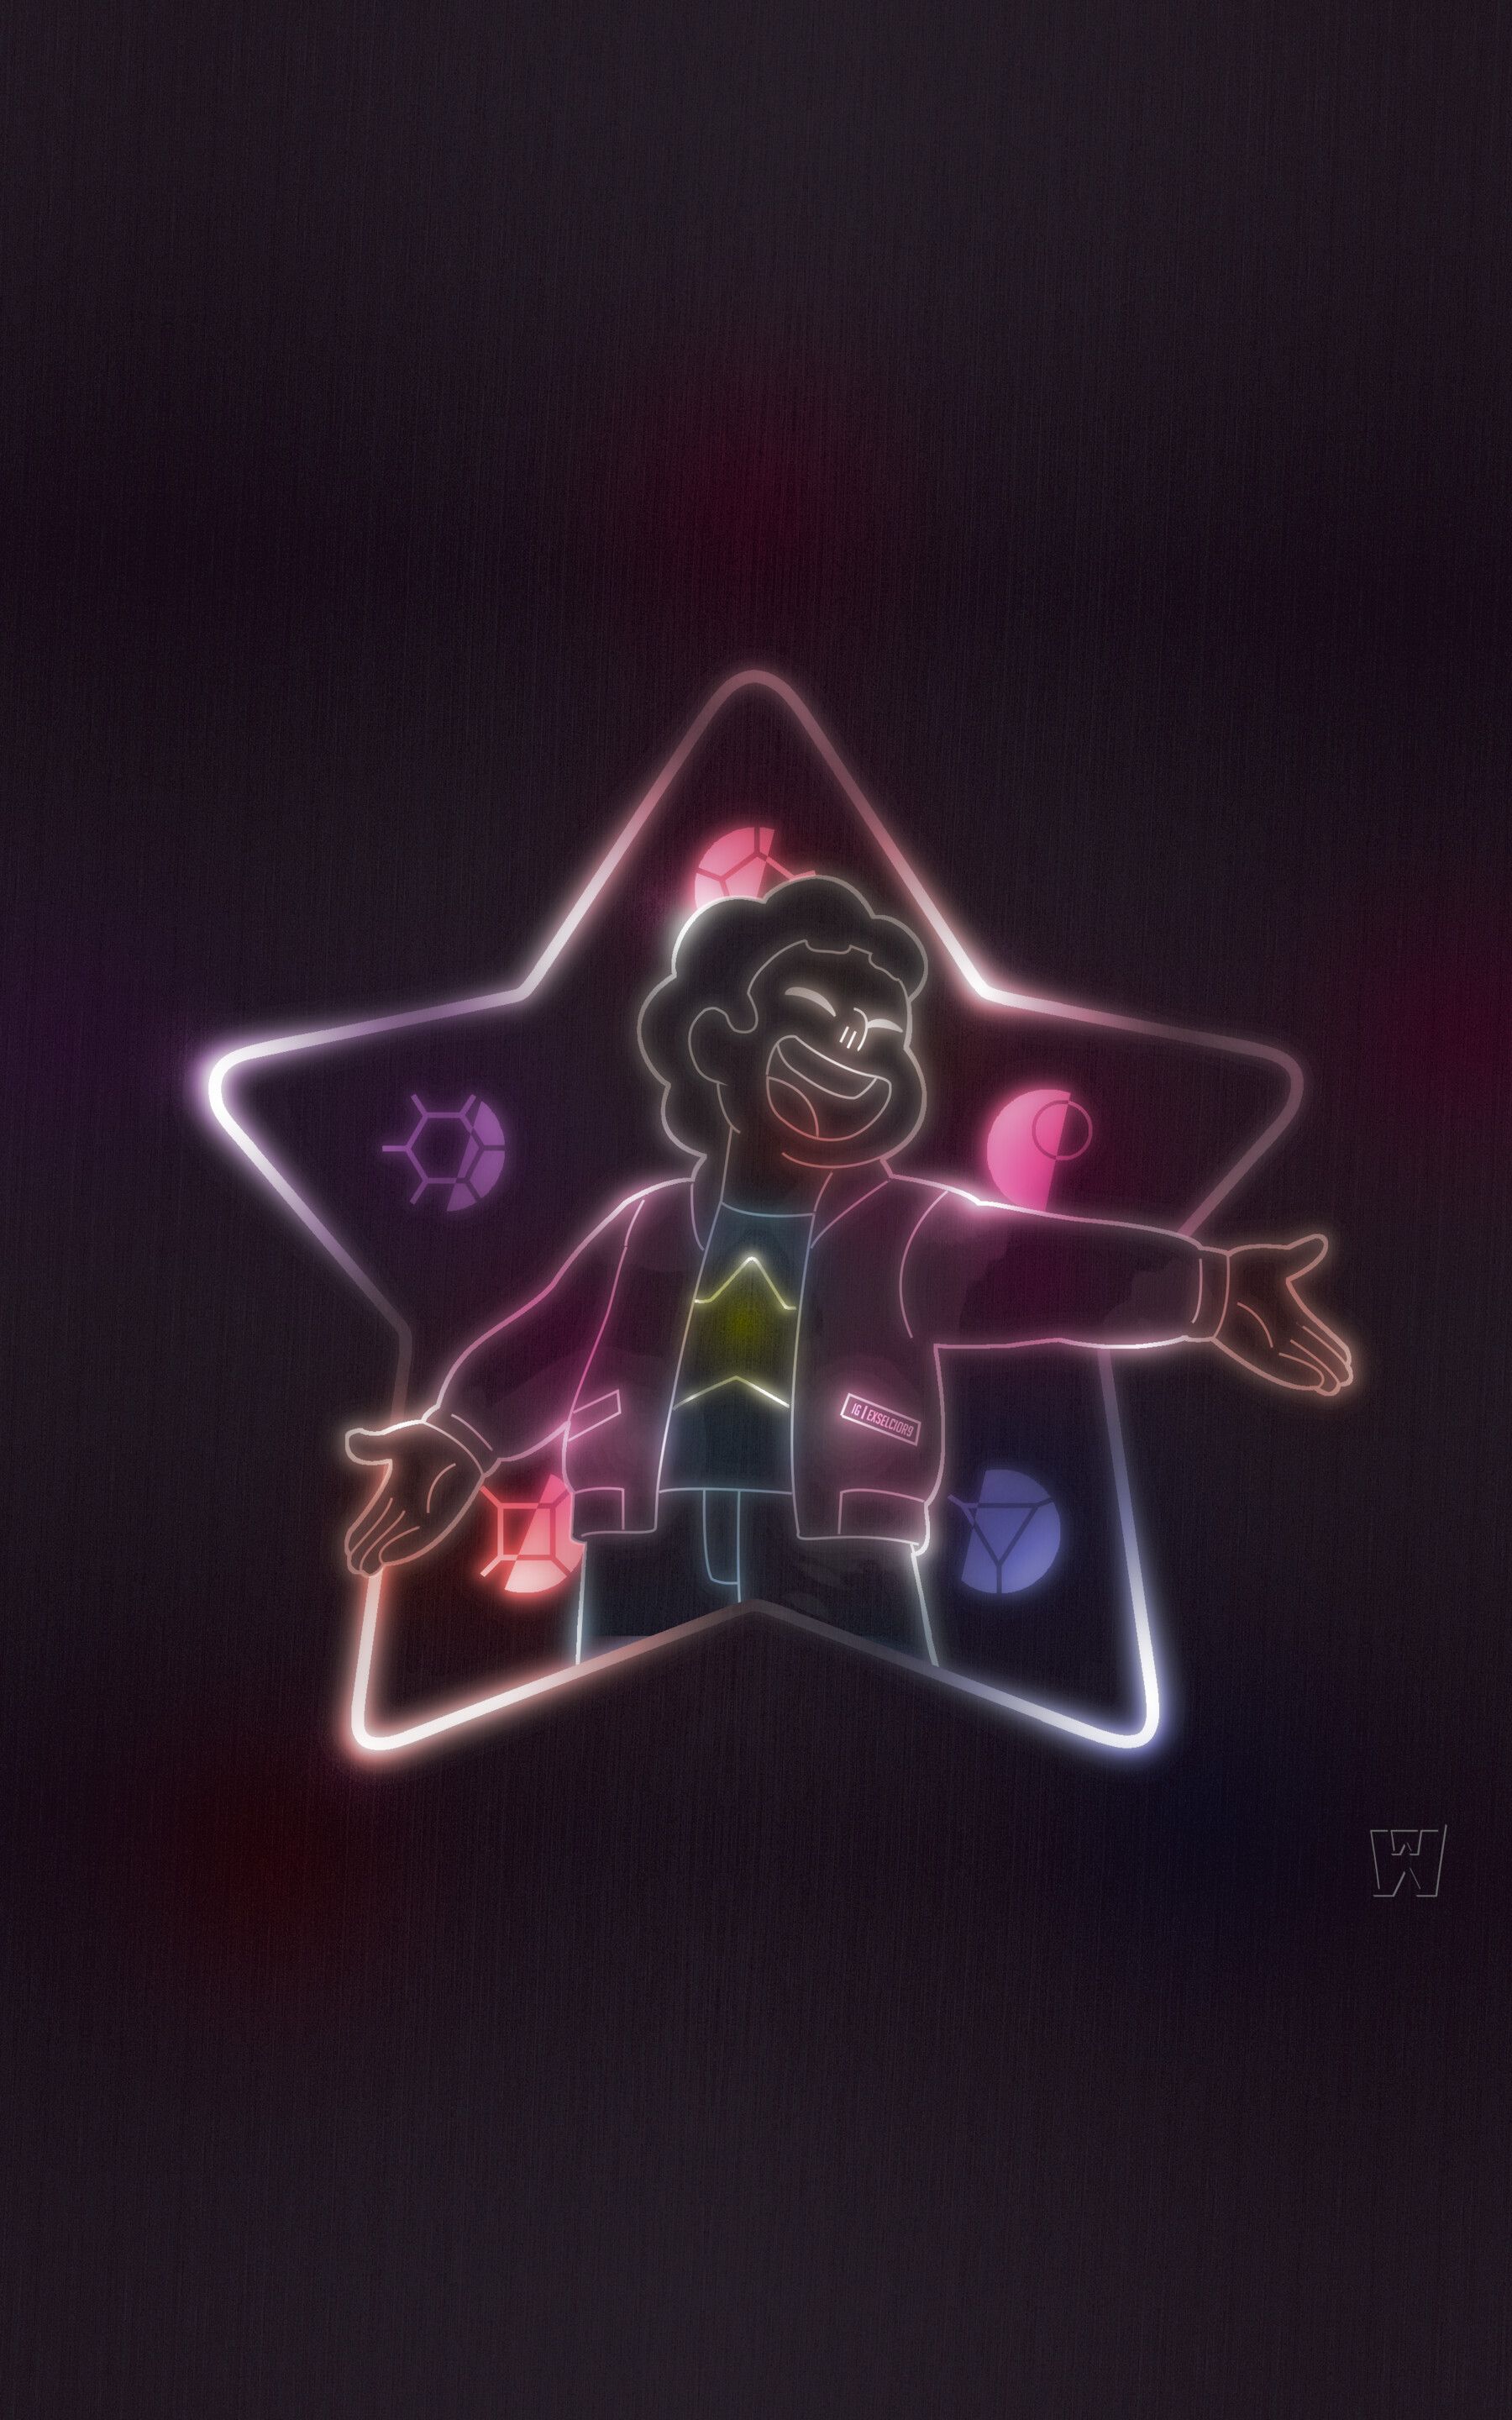 A neon image of a character from Steven Universe, with a star behind them. - Steven Universe